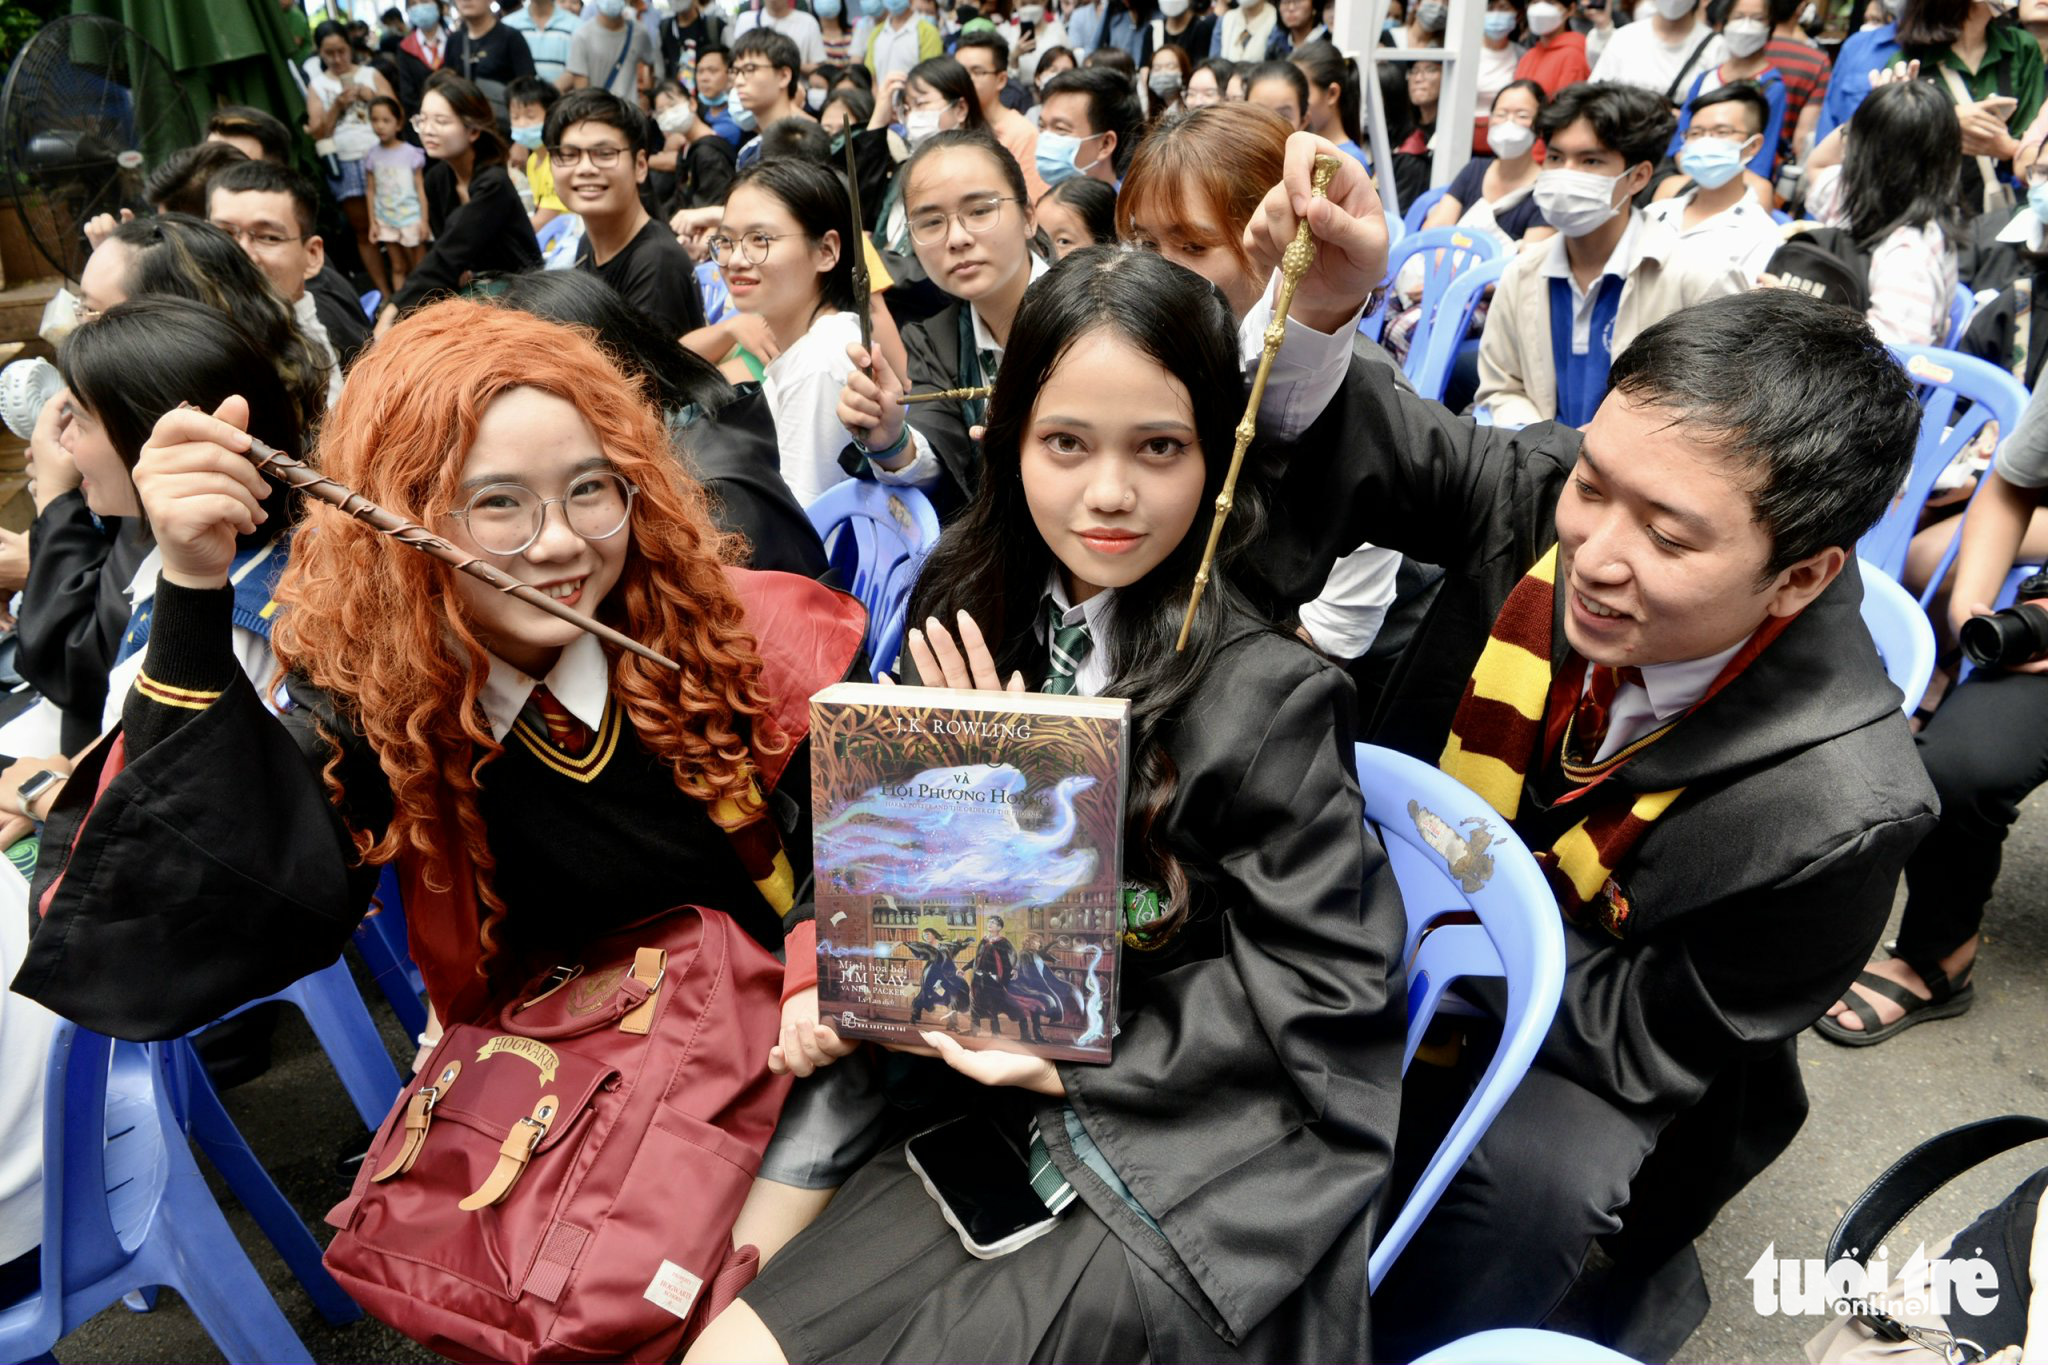 Ho Chi Minh City youth celebrate 25 years of Harry Potter in Vietnam